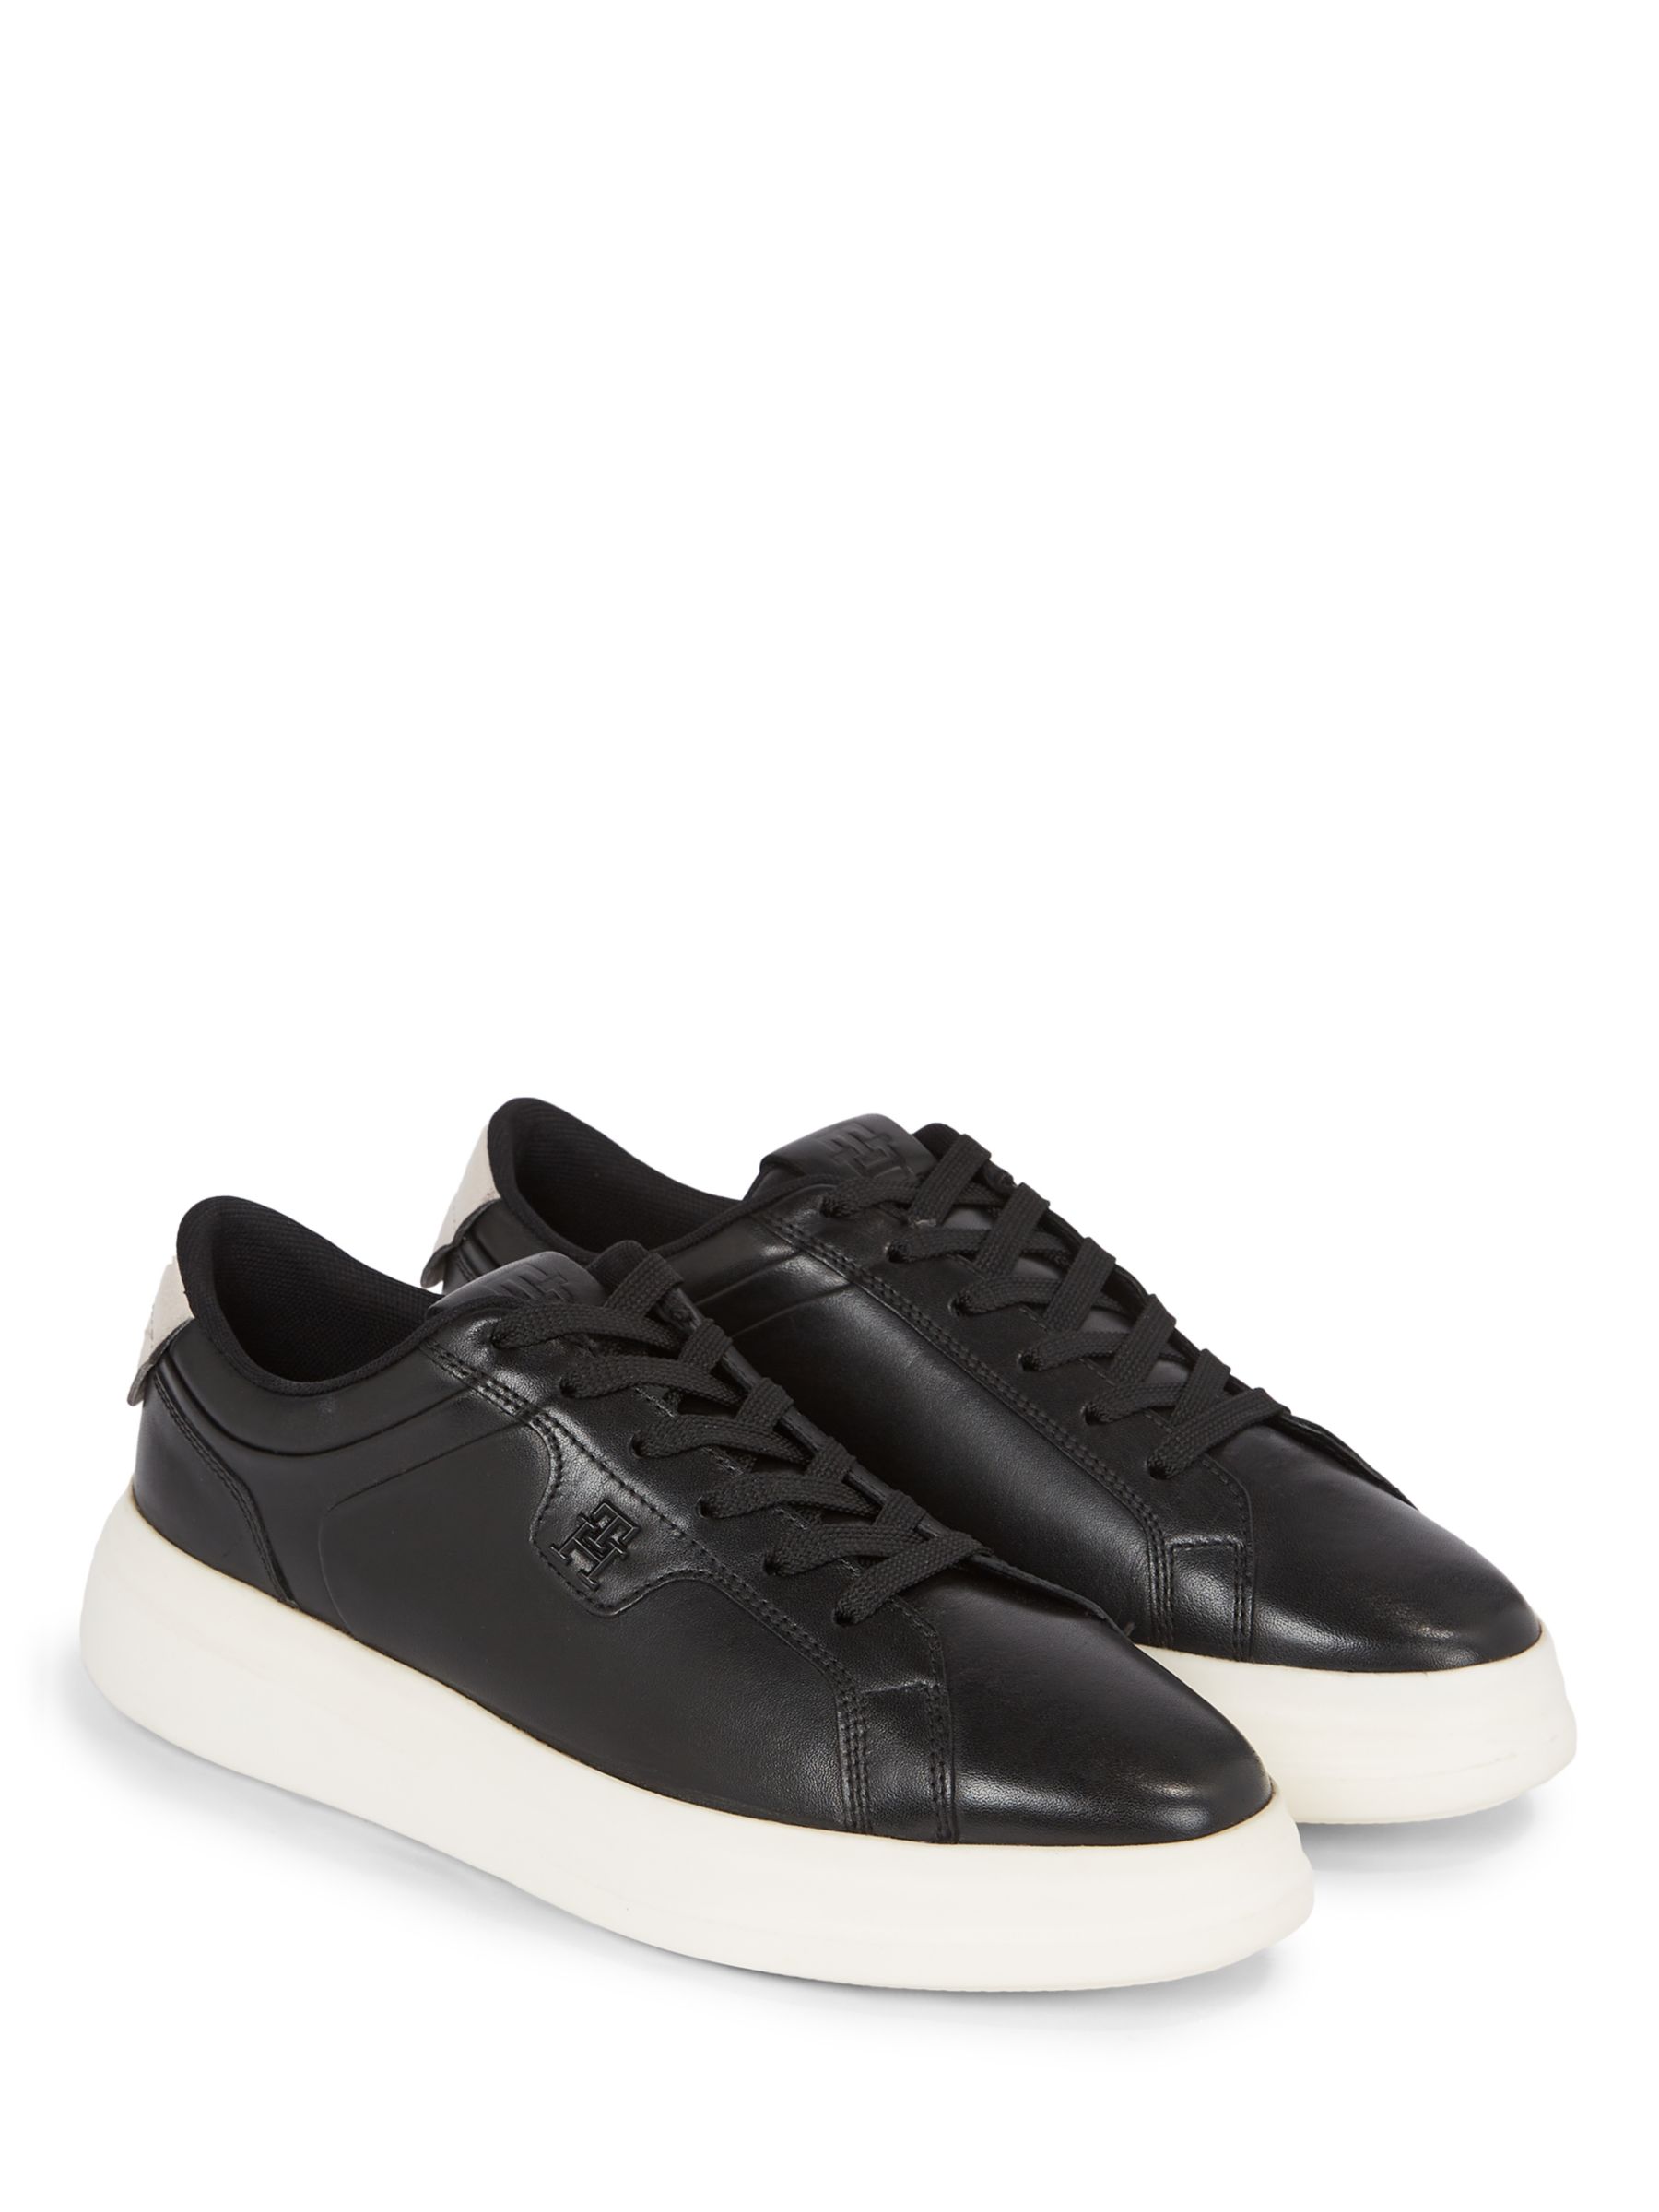 Buy Tommy Hilfiger Leather Lace-Up Flatform Trainers Online at johnlewis.com